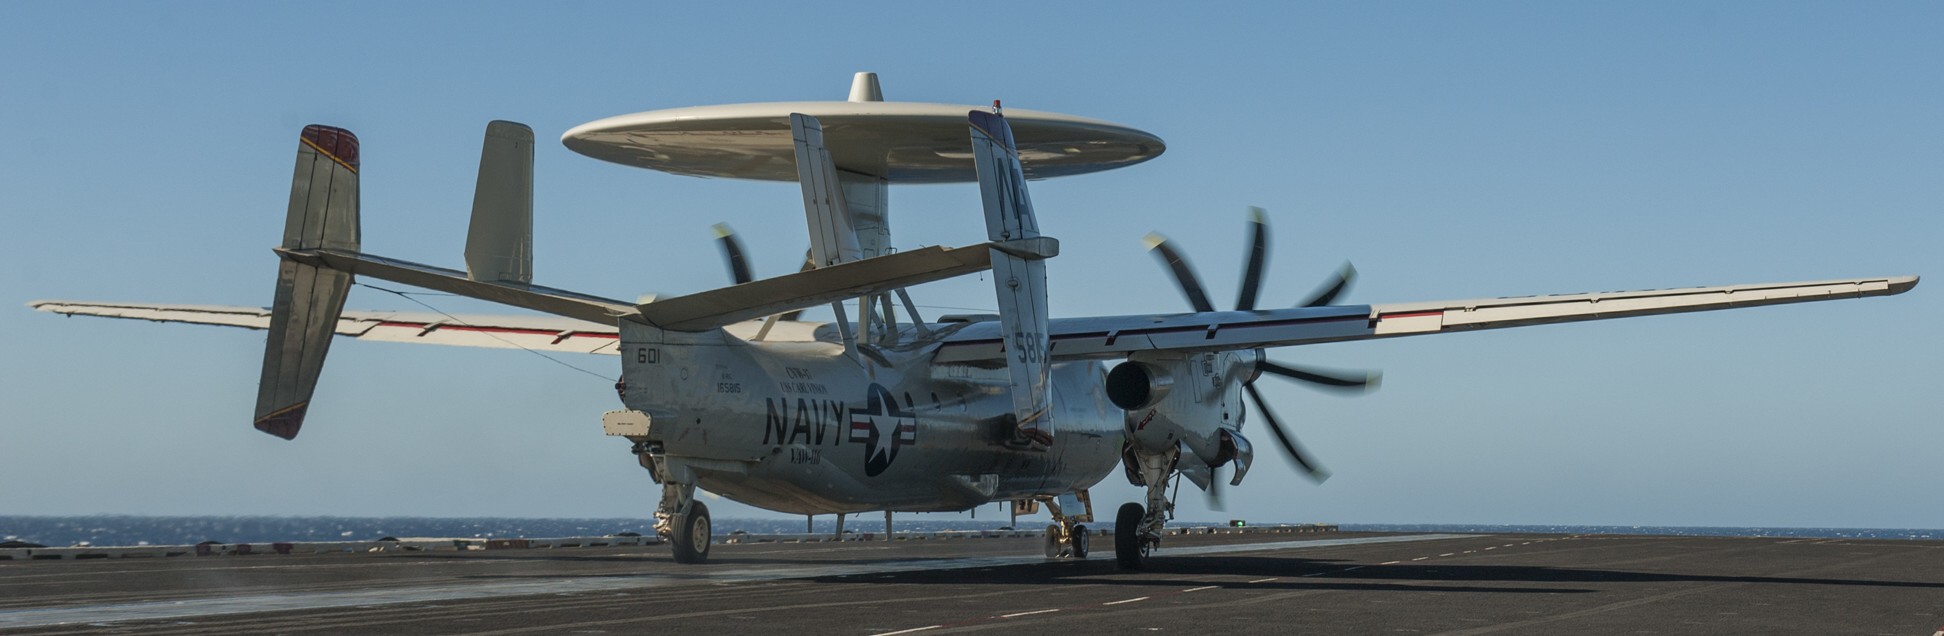 vaw-116 sun kings airborne command control squadron carrier early warning cvw-17 uss carl vinson cvn-70 51